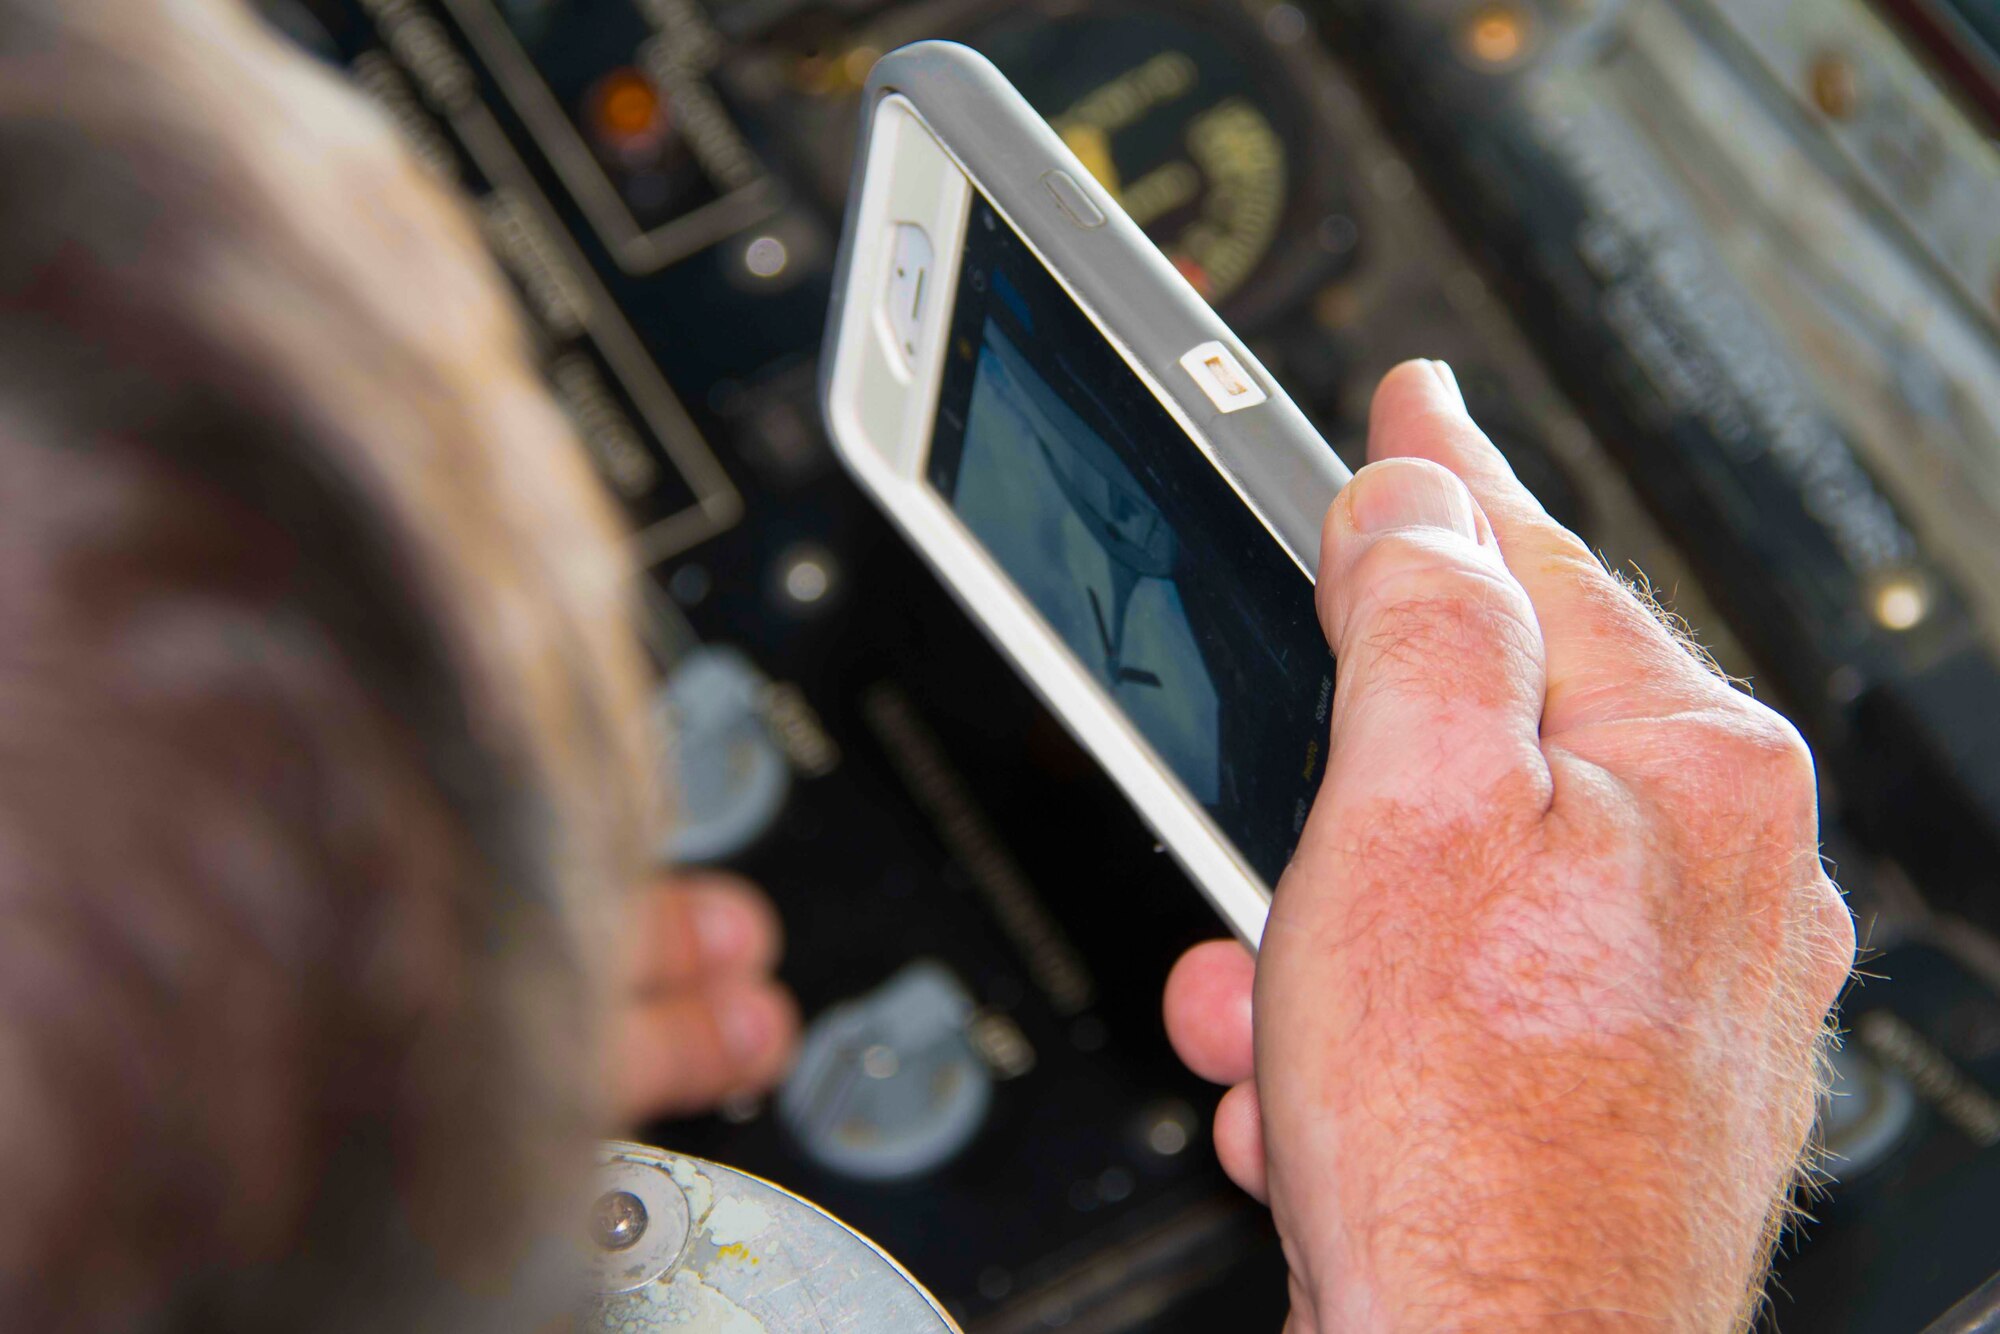 A civic leader from the Greater Shreveport/Bossier City area snaps a picture of the boom on a KC-135 Stratotanker during a flight originating from Barksdale Air Force Base, Louisiana, May 30, 2018.  The flight was part of a Civic Leader Tour to Niagara Falls Air Reserve Station, New York.  The tour allowed local leaders to learn more about the other units within the military and gain a greater understanding of the broader Air Force mission.  (U.S. Air Force photo by Master Sgt. Ted Daigle/released)